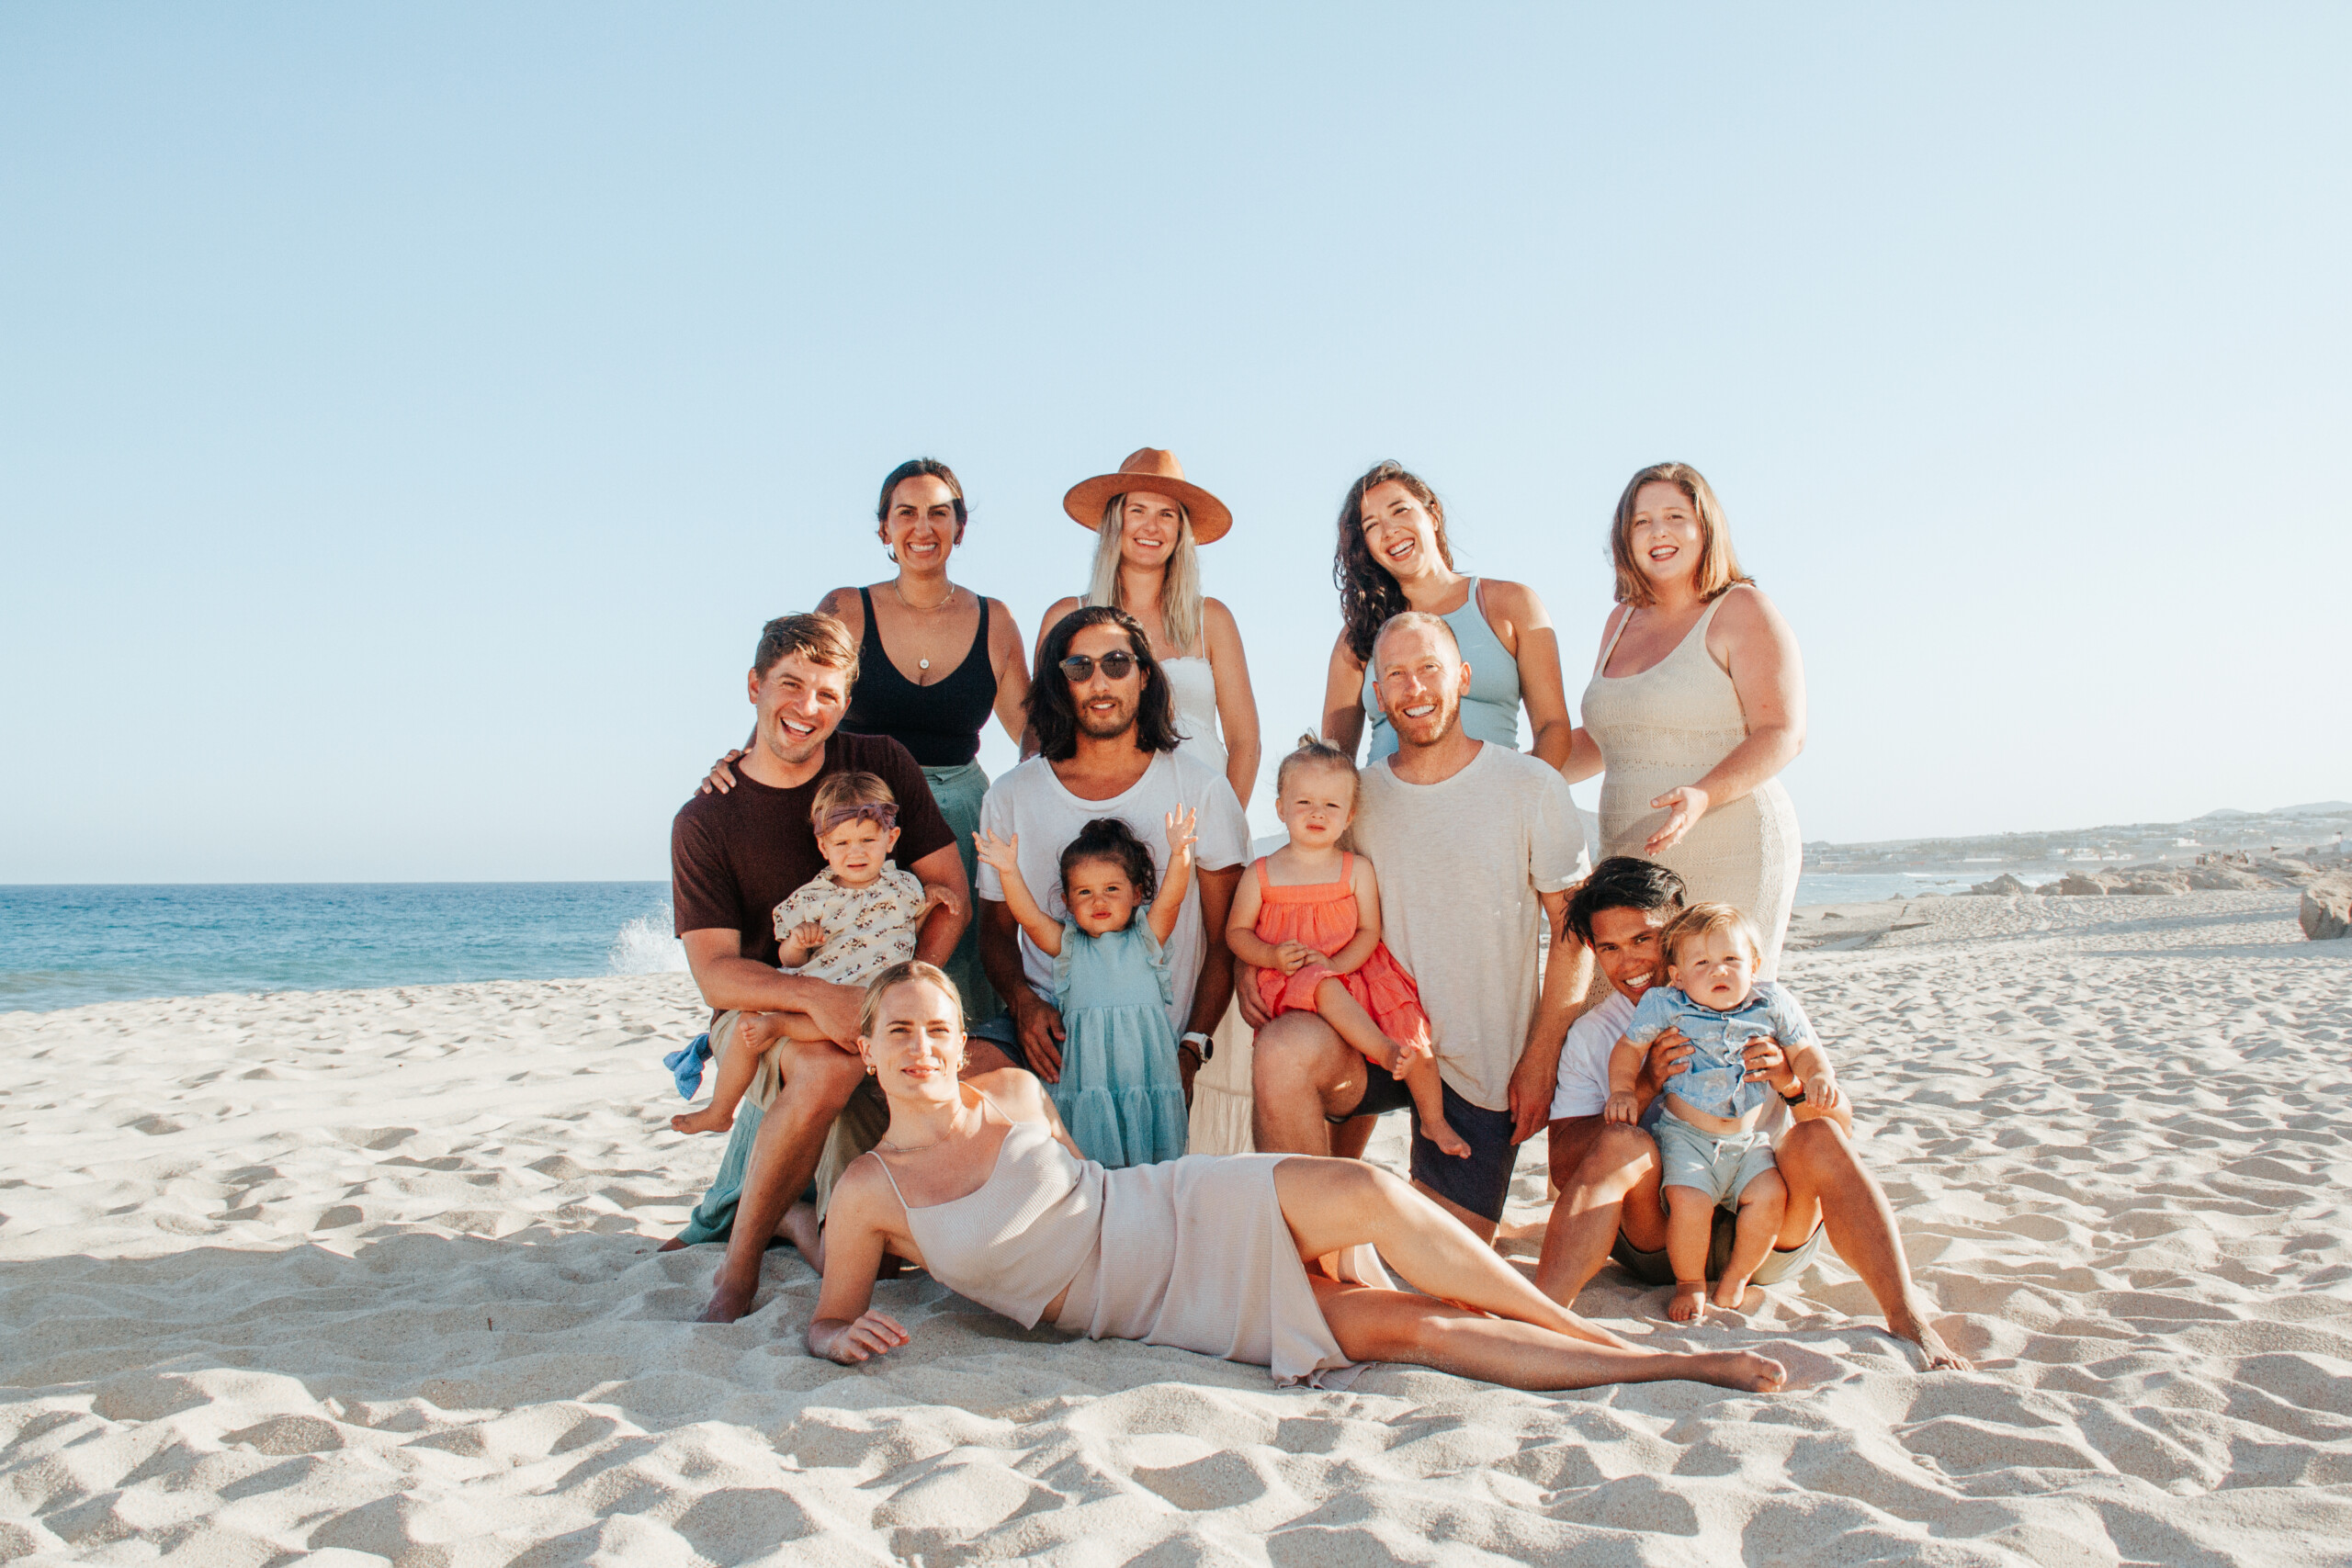 Group photoshoot by Romina, Localgrapher in Cabo San Lucas